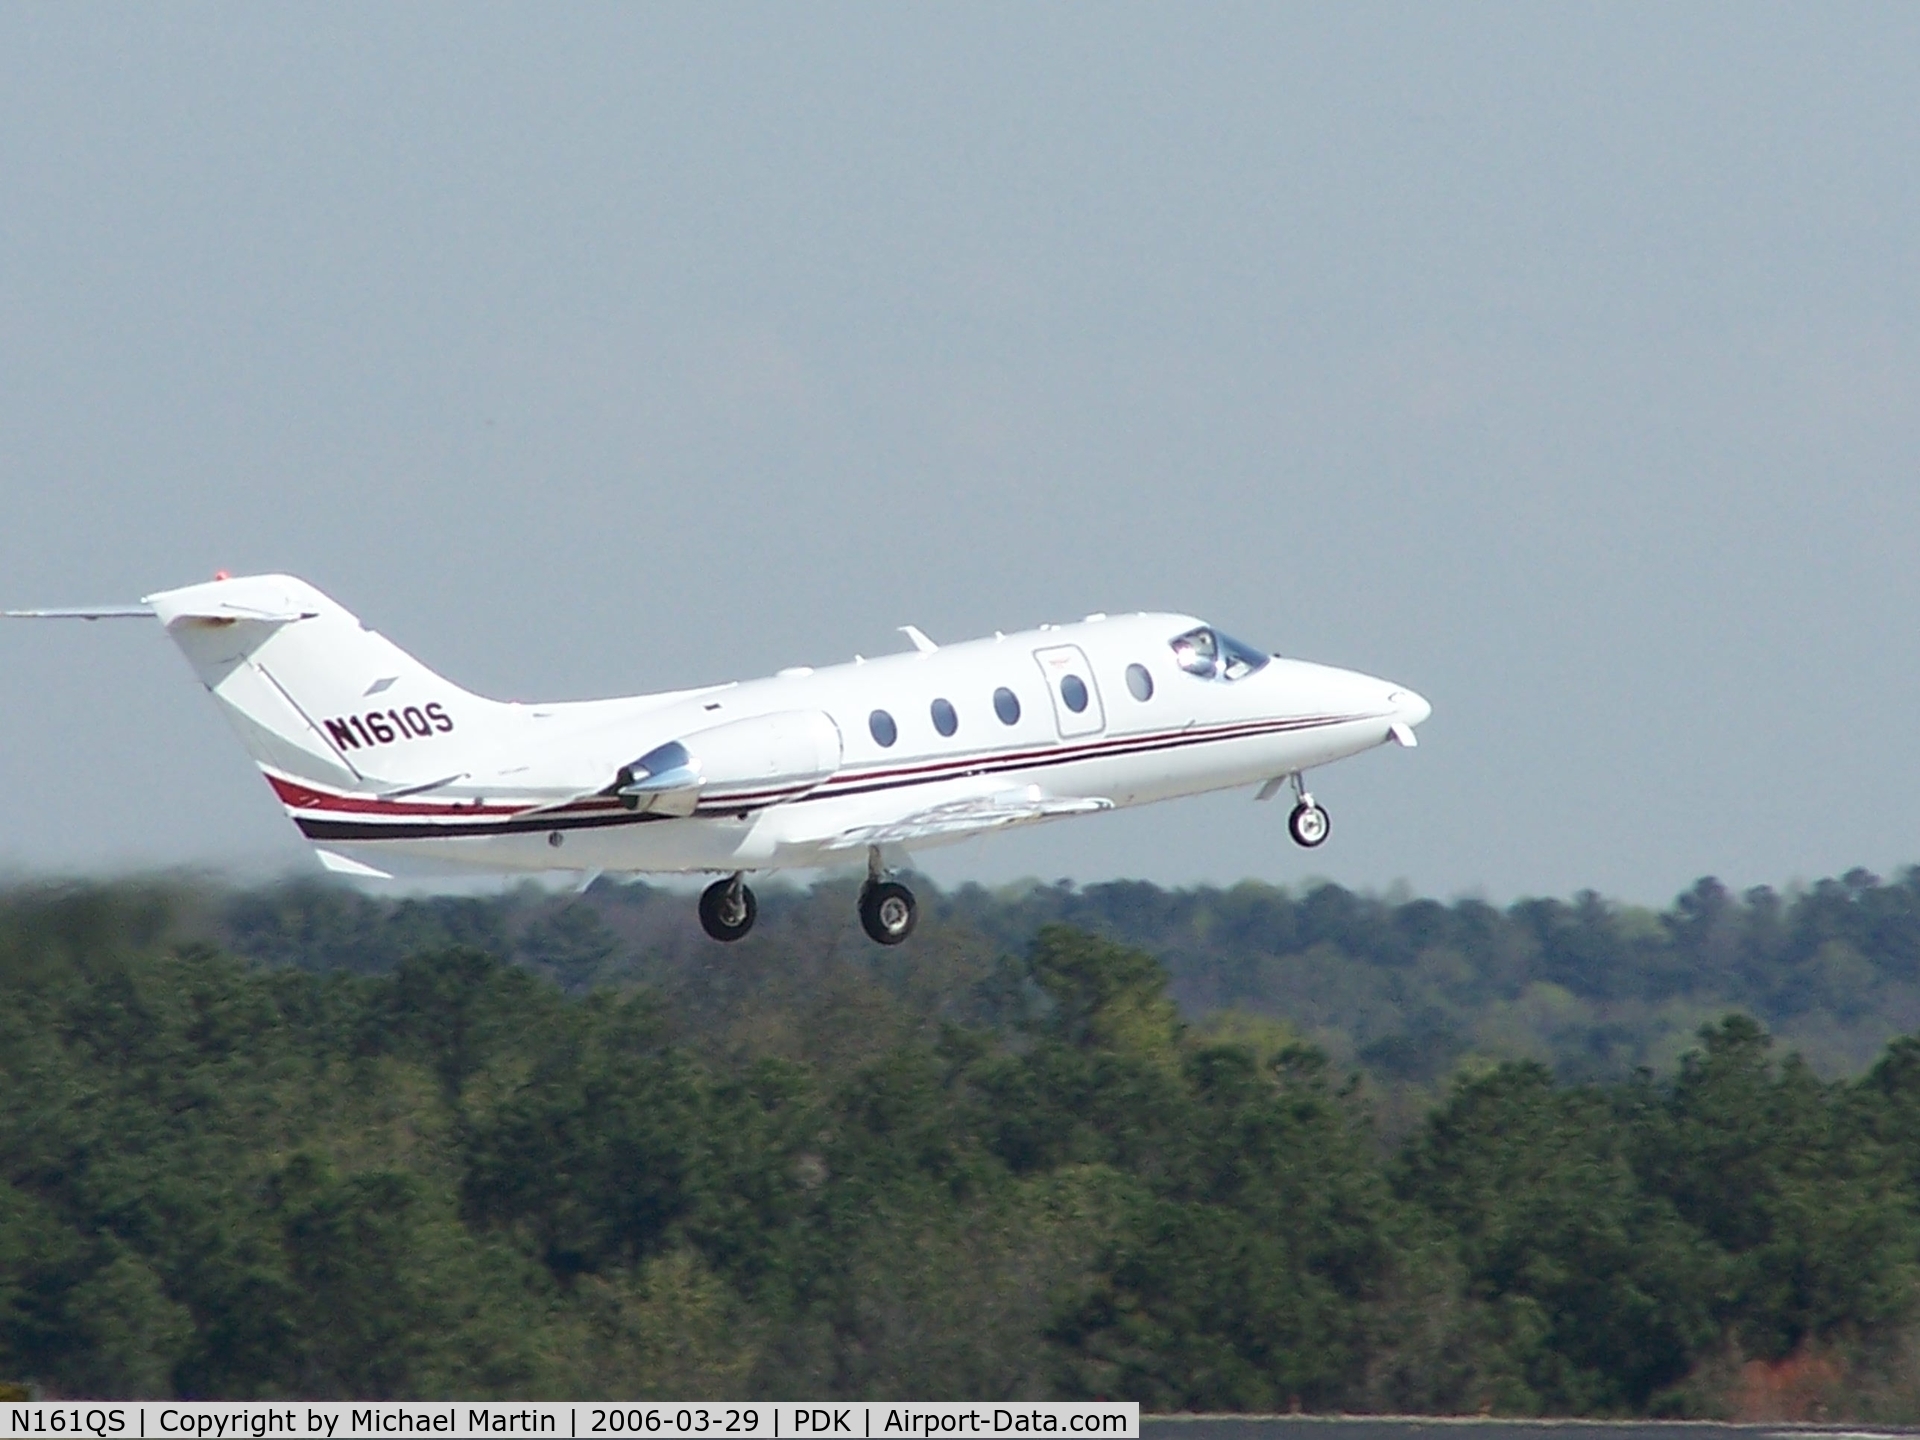 N161QS, Raytheon Aircraft Company 400A C/N RK-435, Departing PDK - Starting to rotate gear.